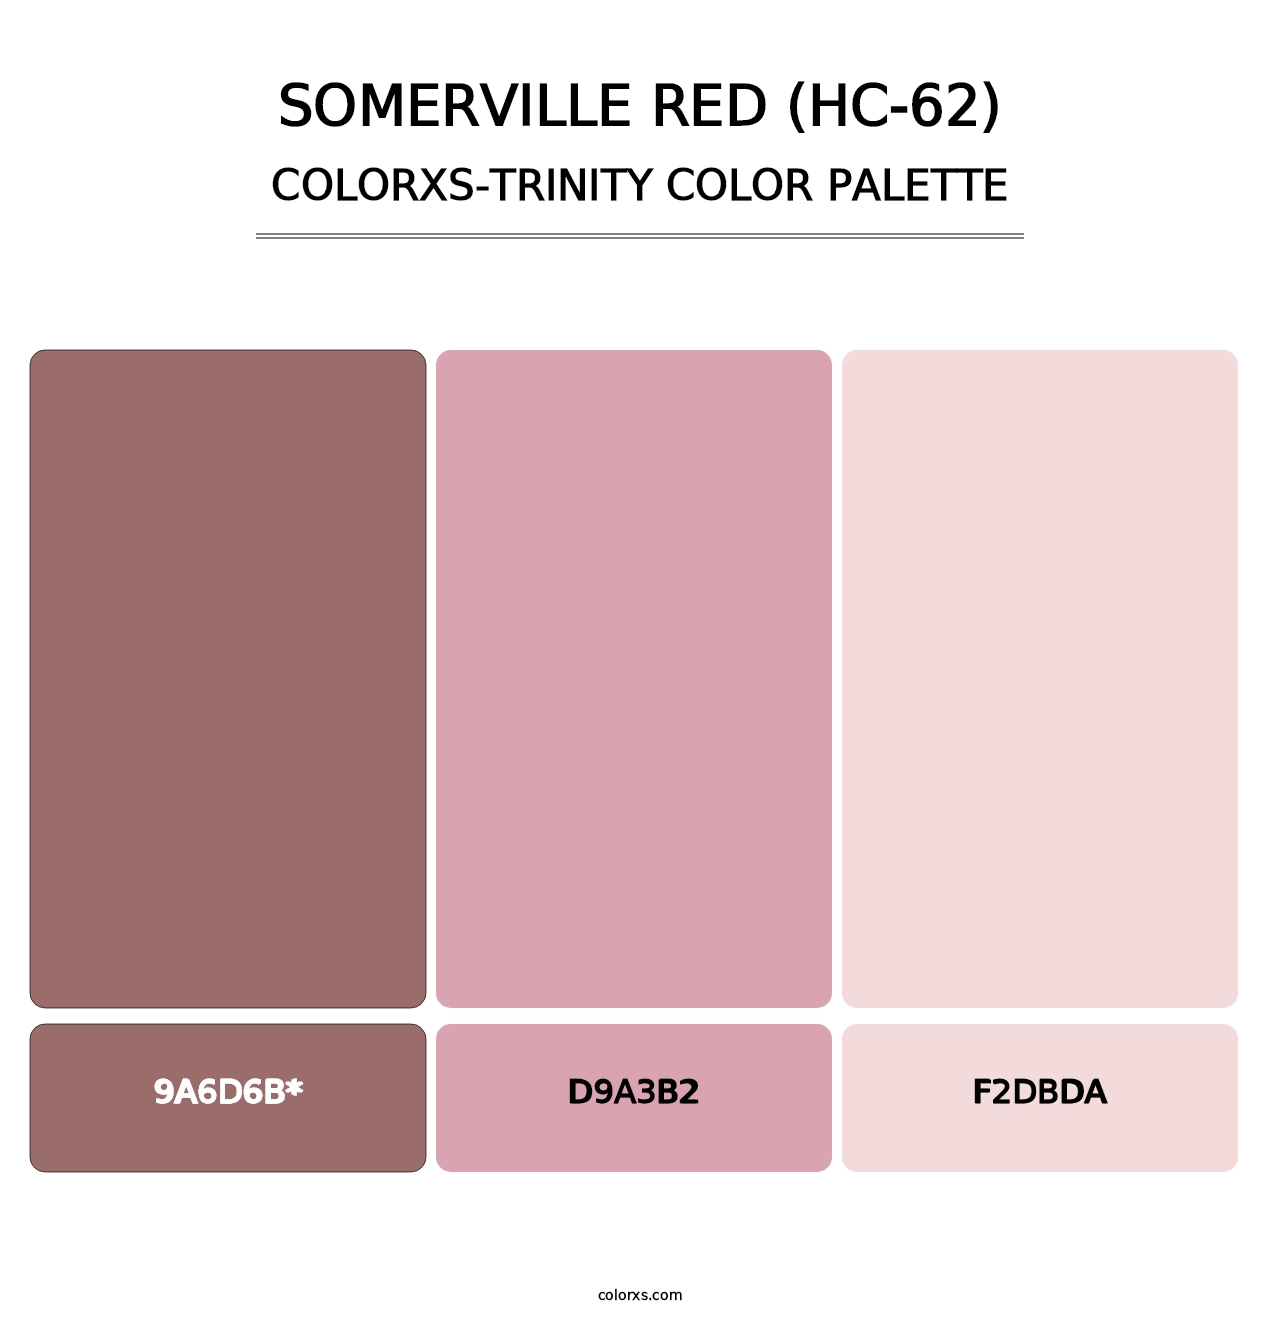 Somerville Red (HC-62) - Colorxs Trinity Palette